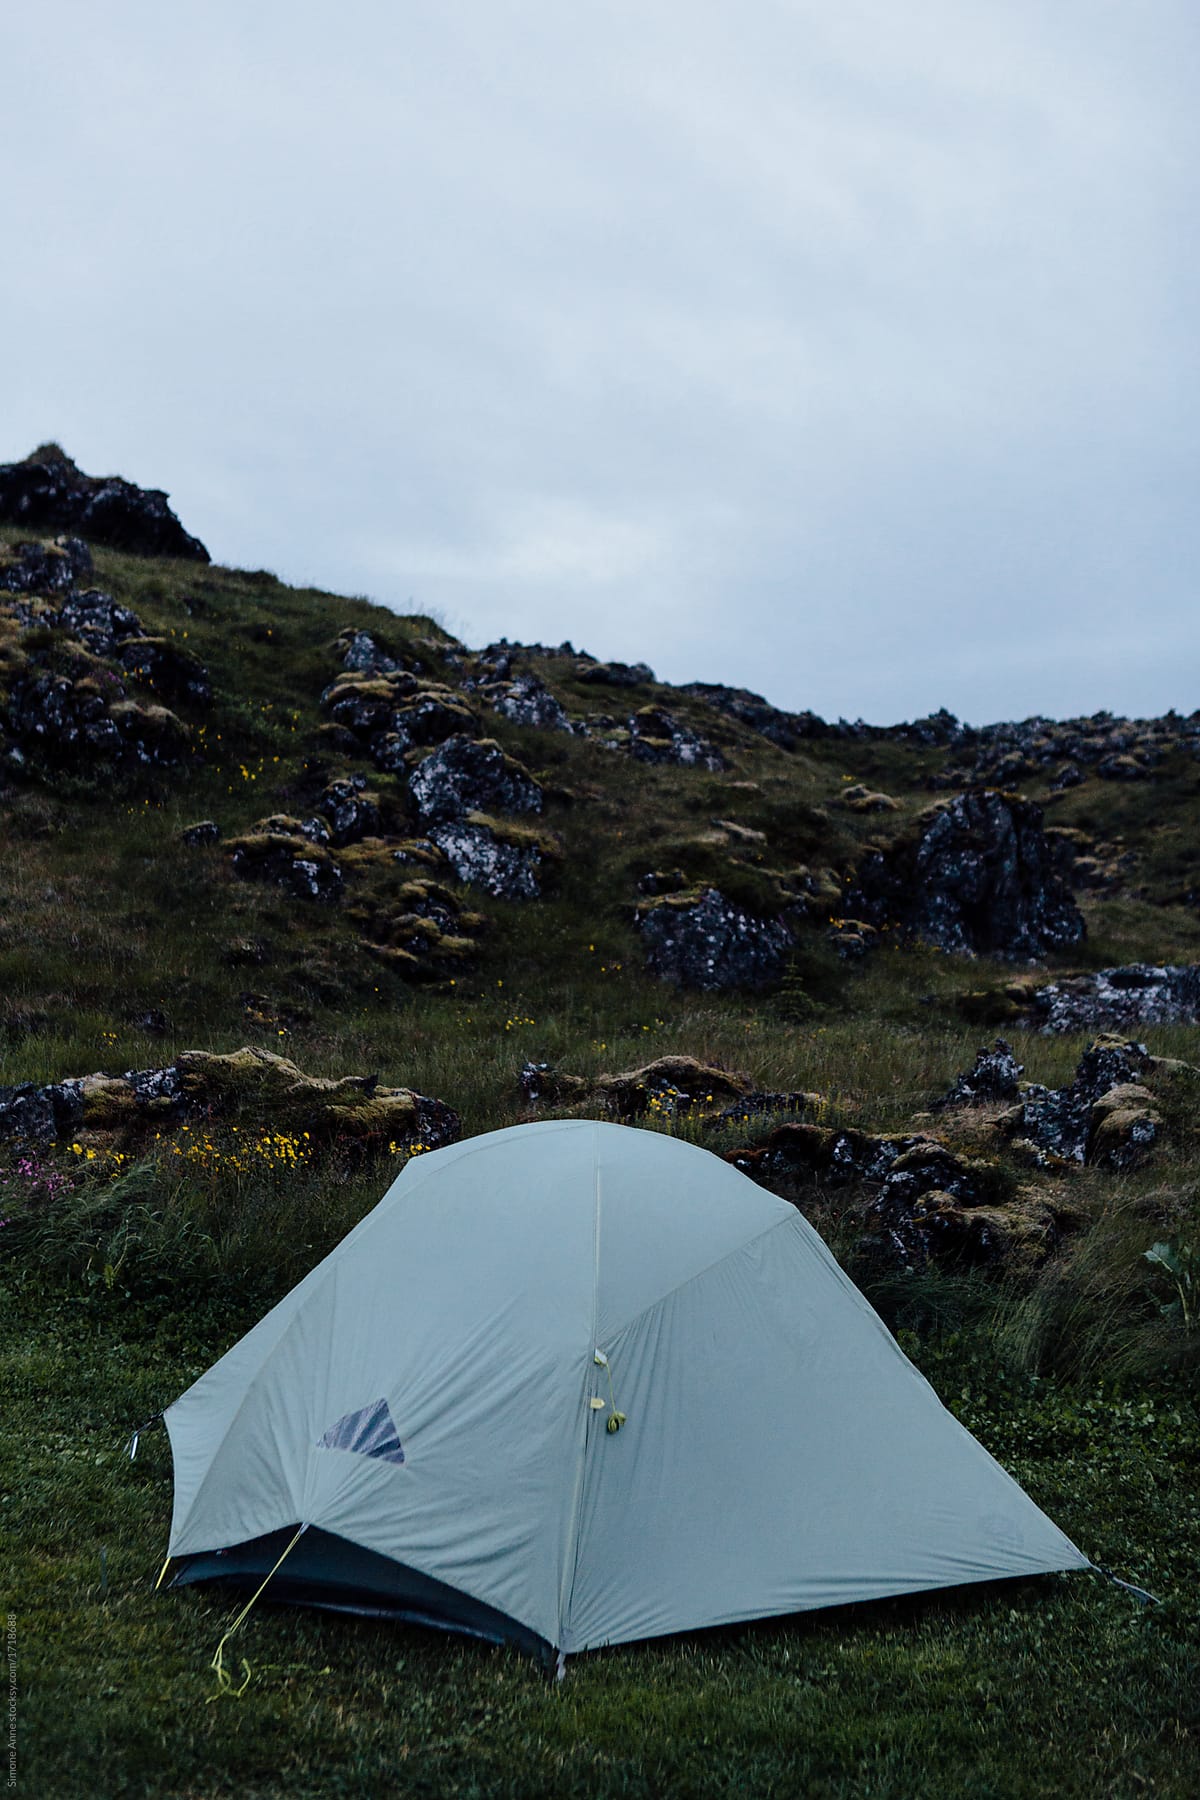 Camping tent set up in front of volcanic rocks and green grass in Iceland